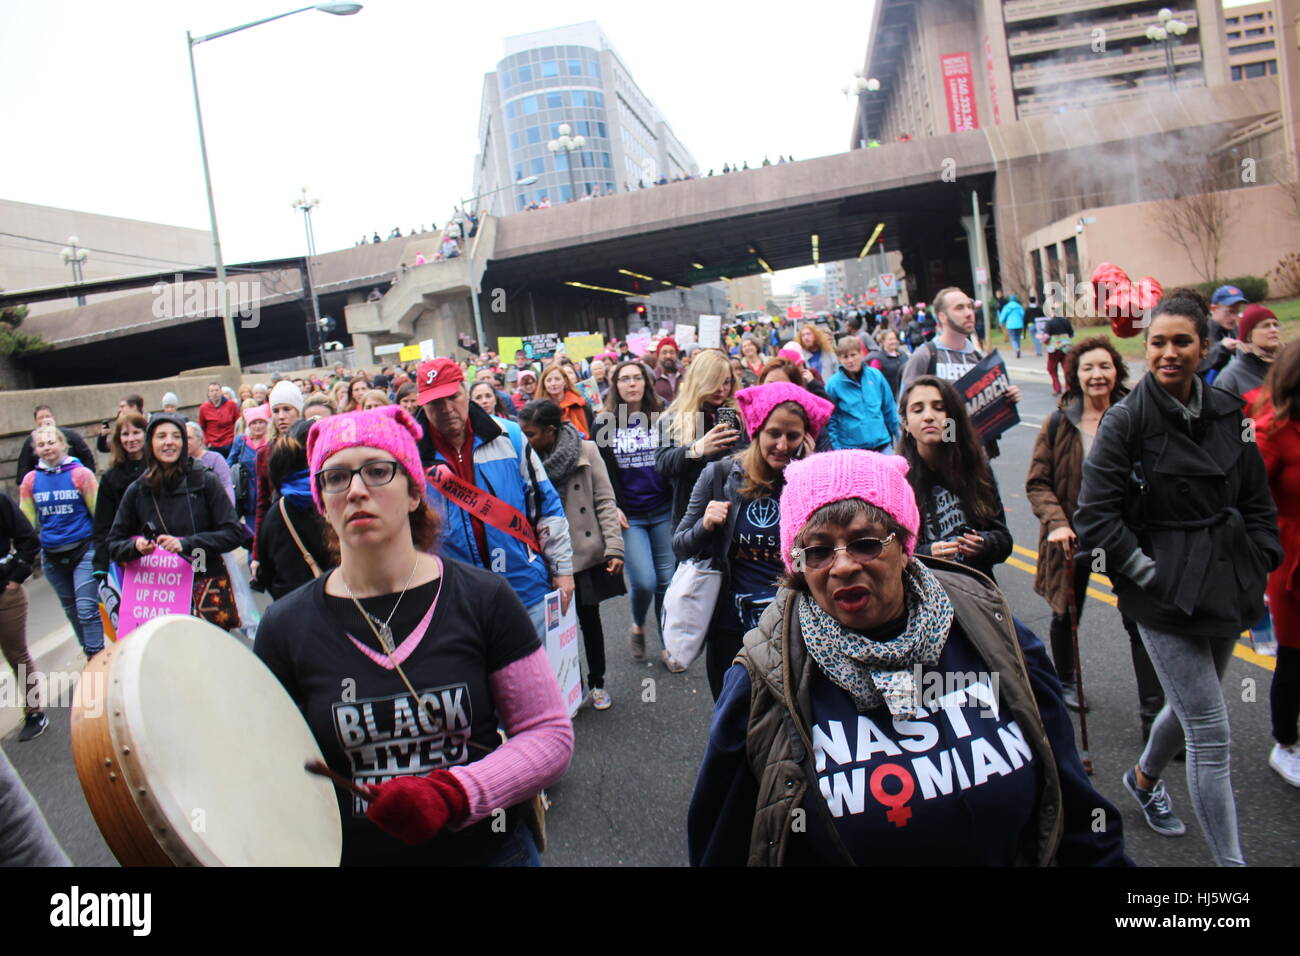 District of Columbia, USA. 21 Jan, 2017. Protesters march along Independence Avenue SW, including a woman beating a buffalo drum. Stock Photo